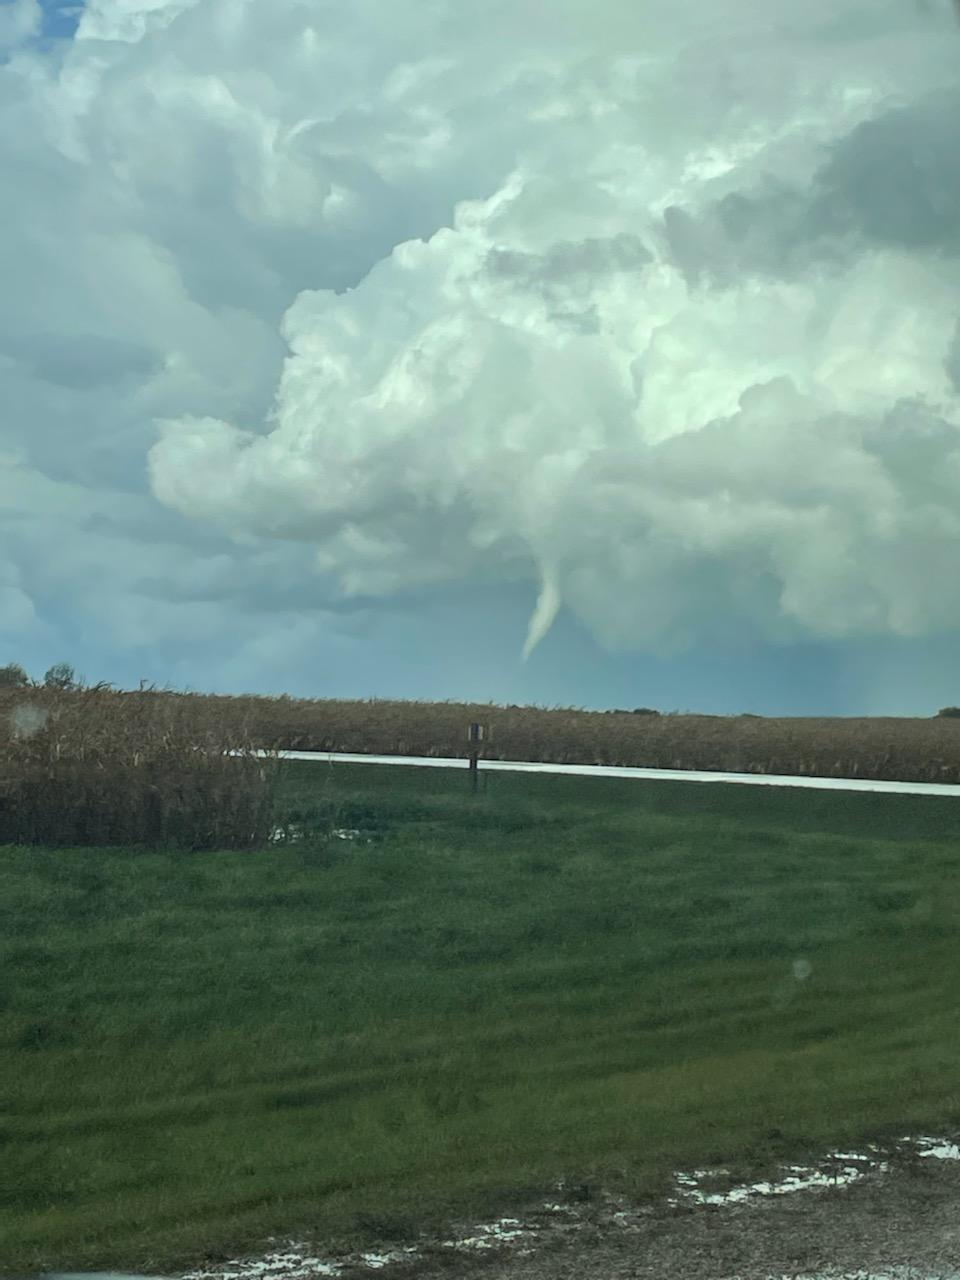 Tornado occurring in Big Stone County around or after 3:40 PM (Photo from Big Stone County Sheriff's Office)